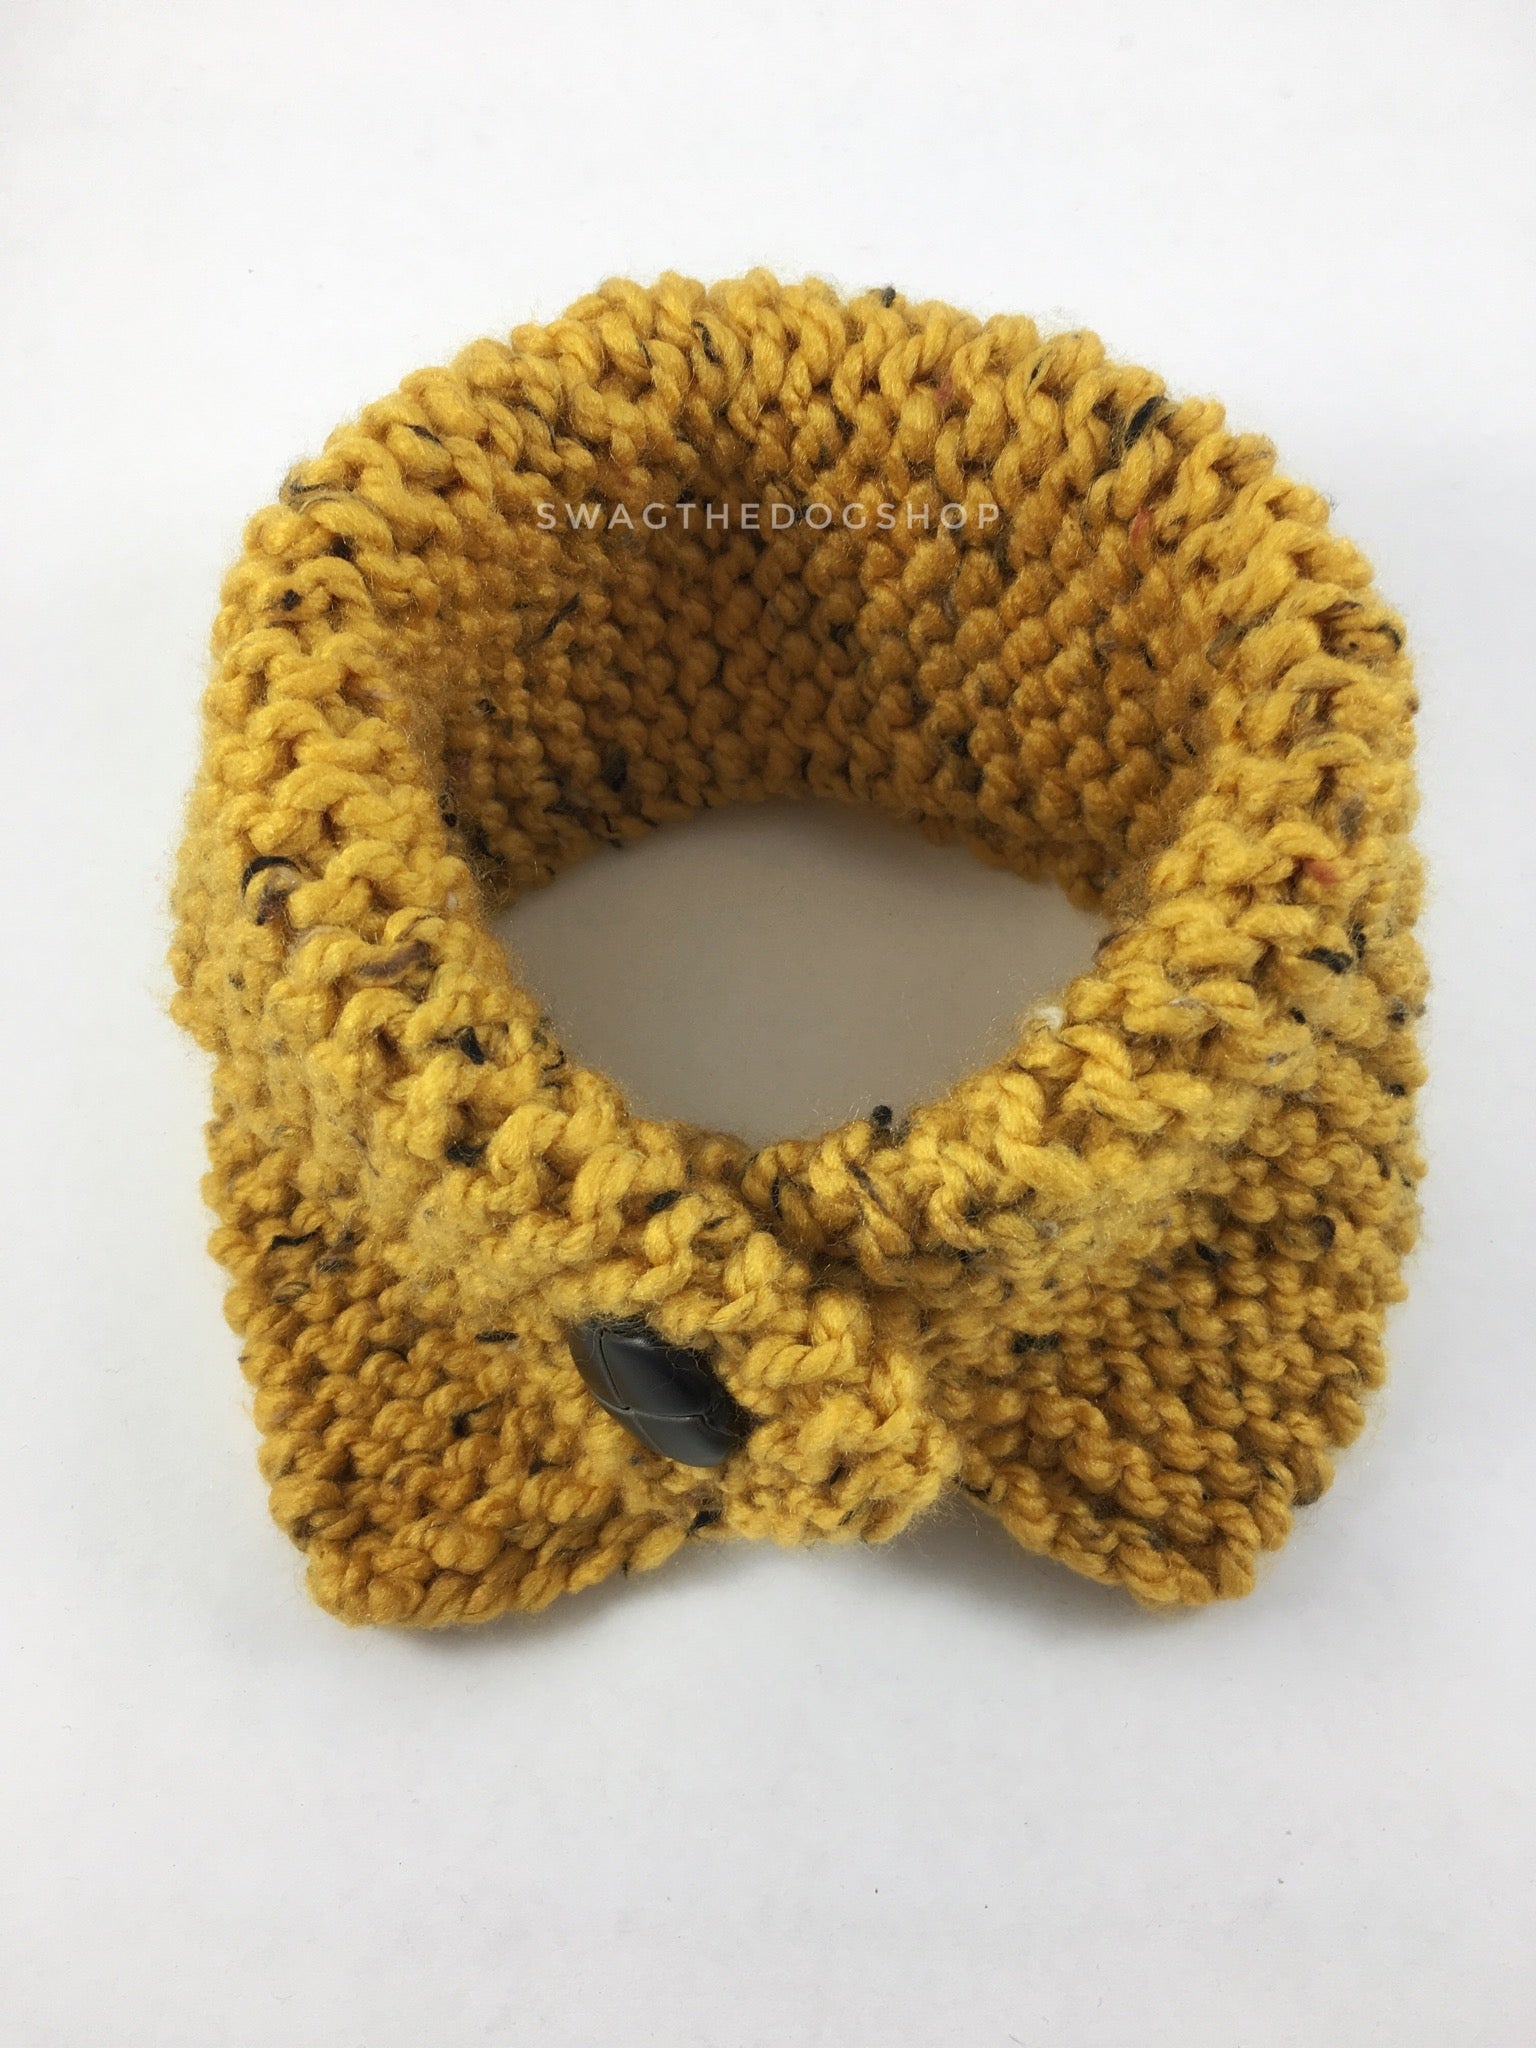 Honey Mustard Tweed Swagsnood - Product Above View. Honey Mustard Color with Black Speck Tweed Dog Snood with Accent Button